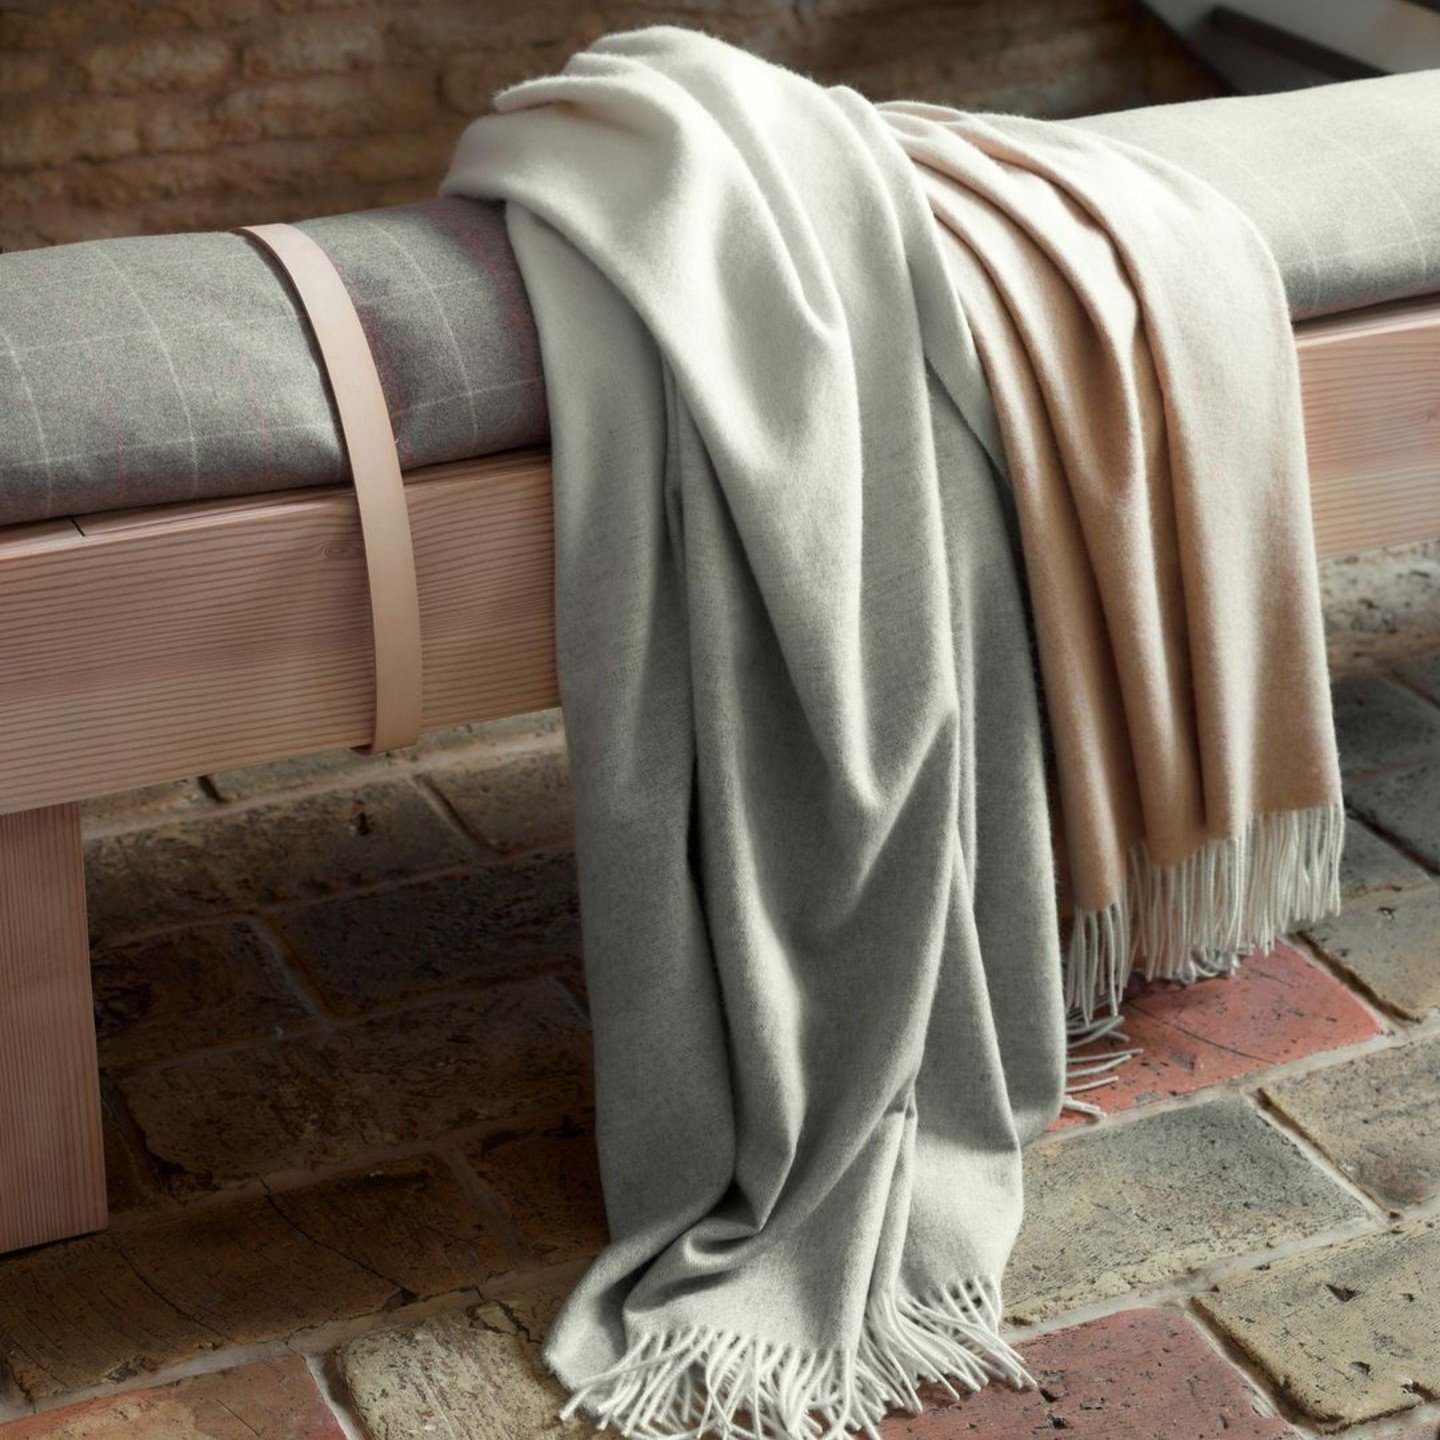 We are thrilled to highlight the Ombr&eacute; Throw from @johnstonsofelgin_interiors. Featuring a stunning large-scale design, this distinctive pattern is created by dyeing each yarn individually and blending multiple shades together. 

Throw: Cashme